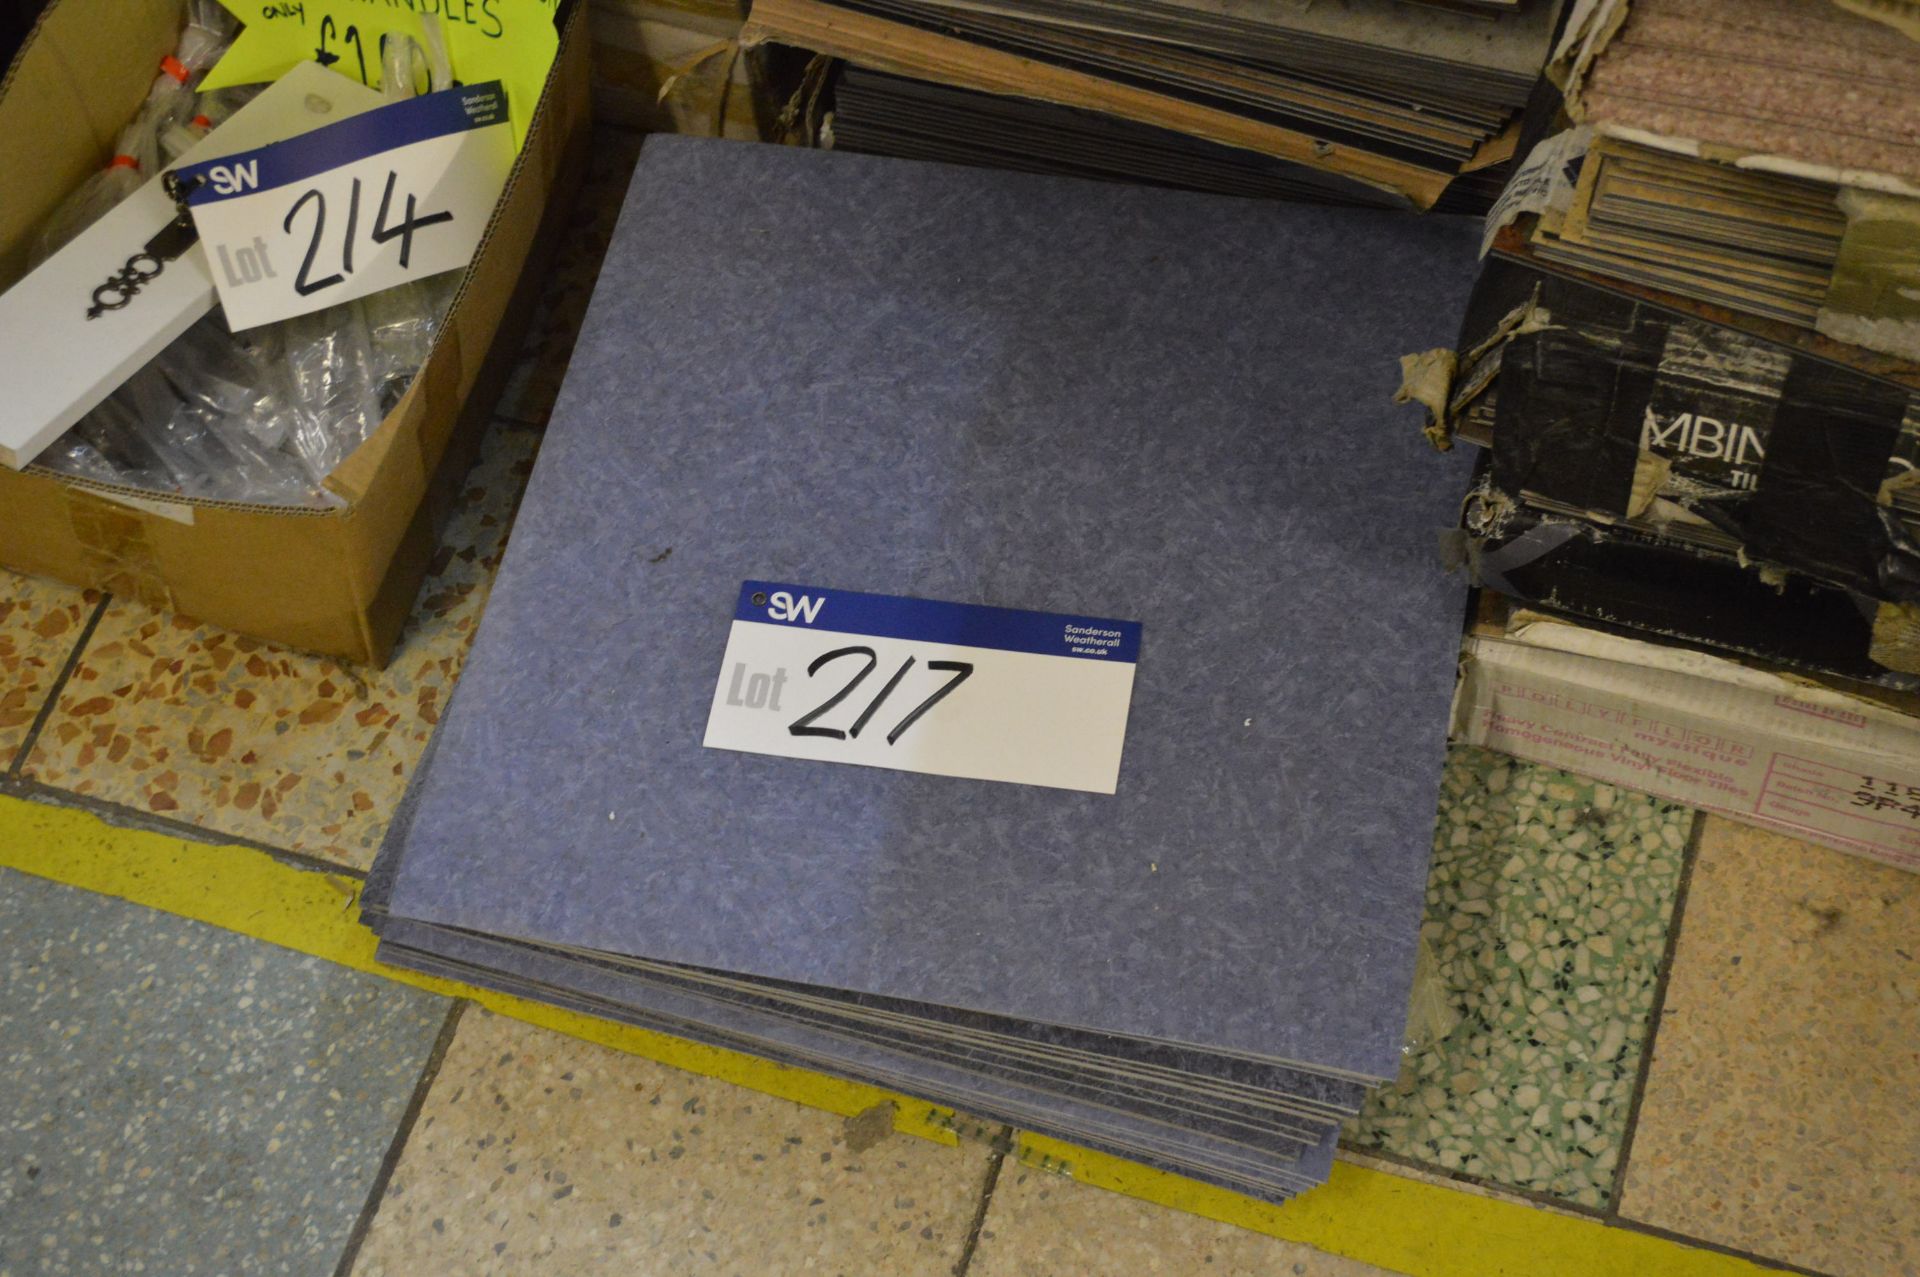 Mainly Blue Vinyl Floor Tiles, in one stack